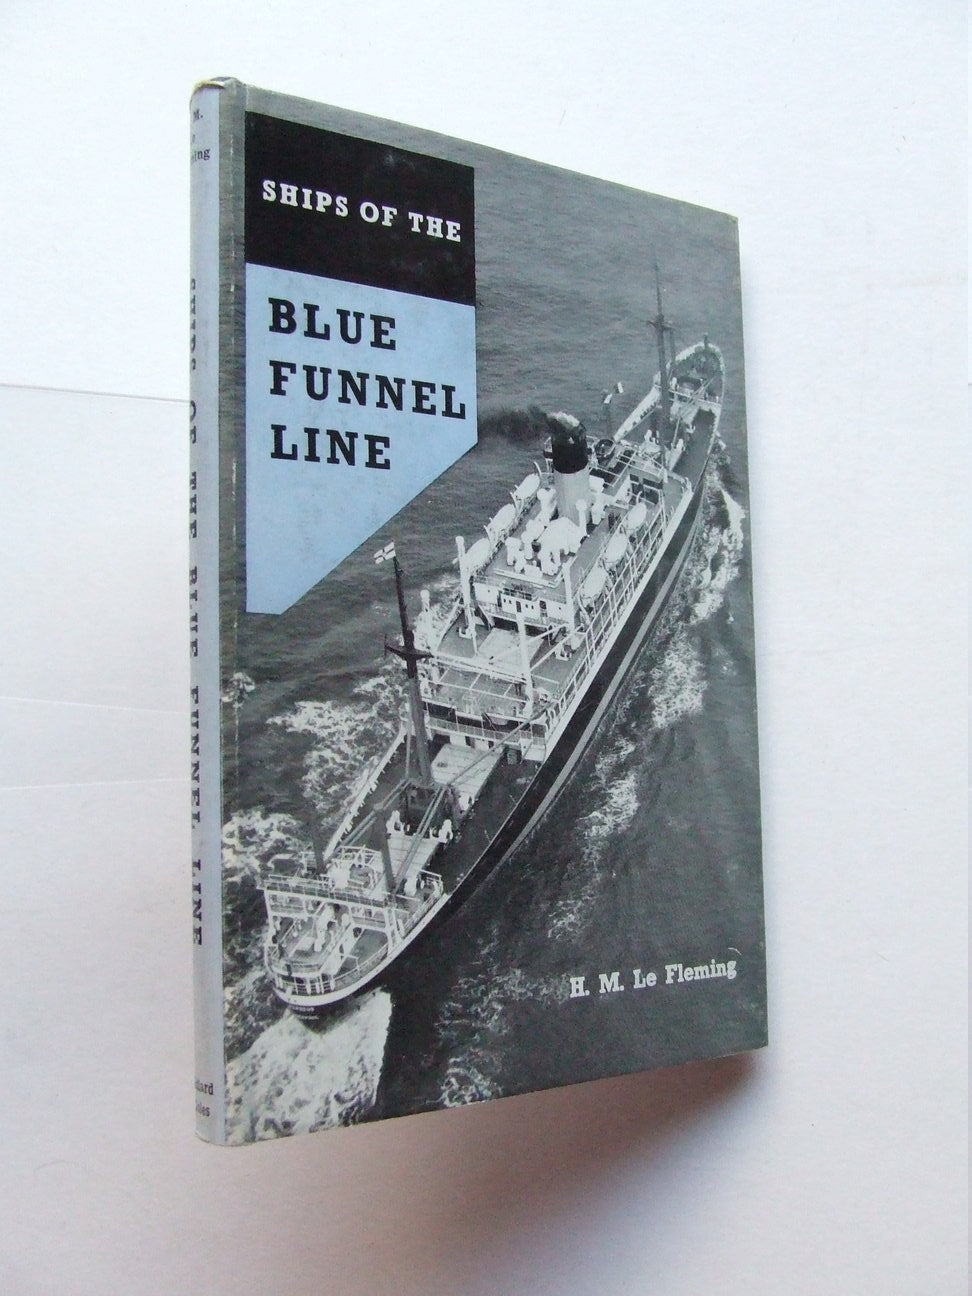 Ships of the Blue Funnel Line